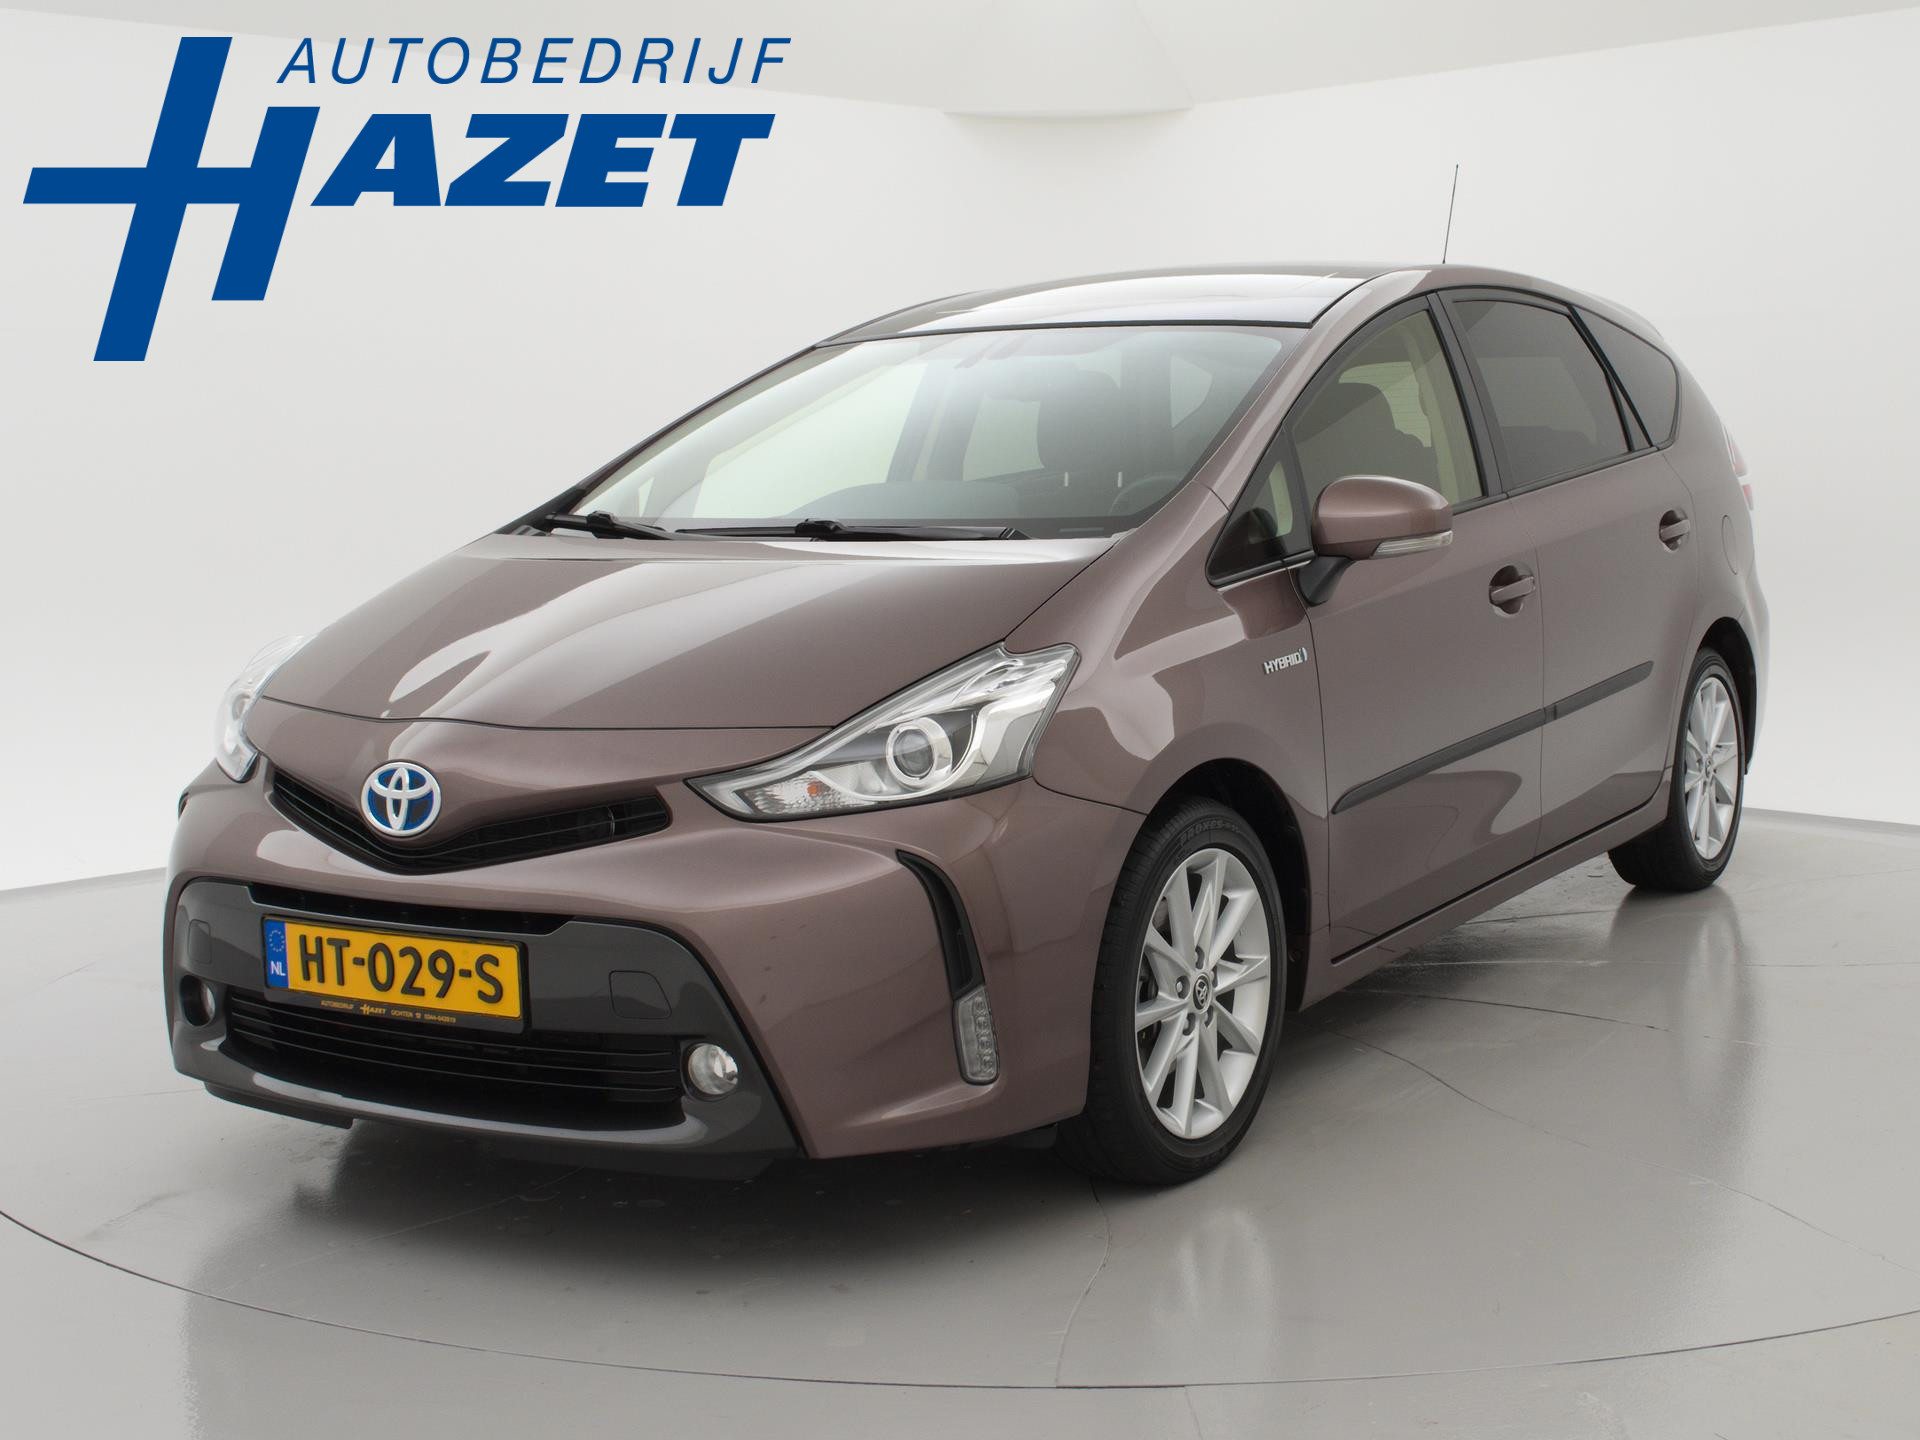 Toyota Prius Wagon 1.8 7-PERSOONS Toyota Prius + WAGON 1.8 7-PERSOONS + PANORAMA / NAVIGATIE / LED bij viaBOVAG.nl